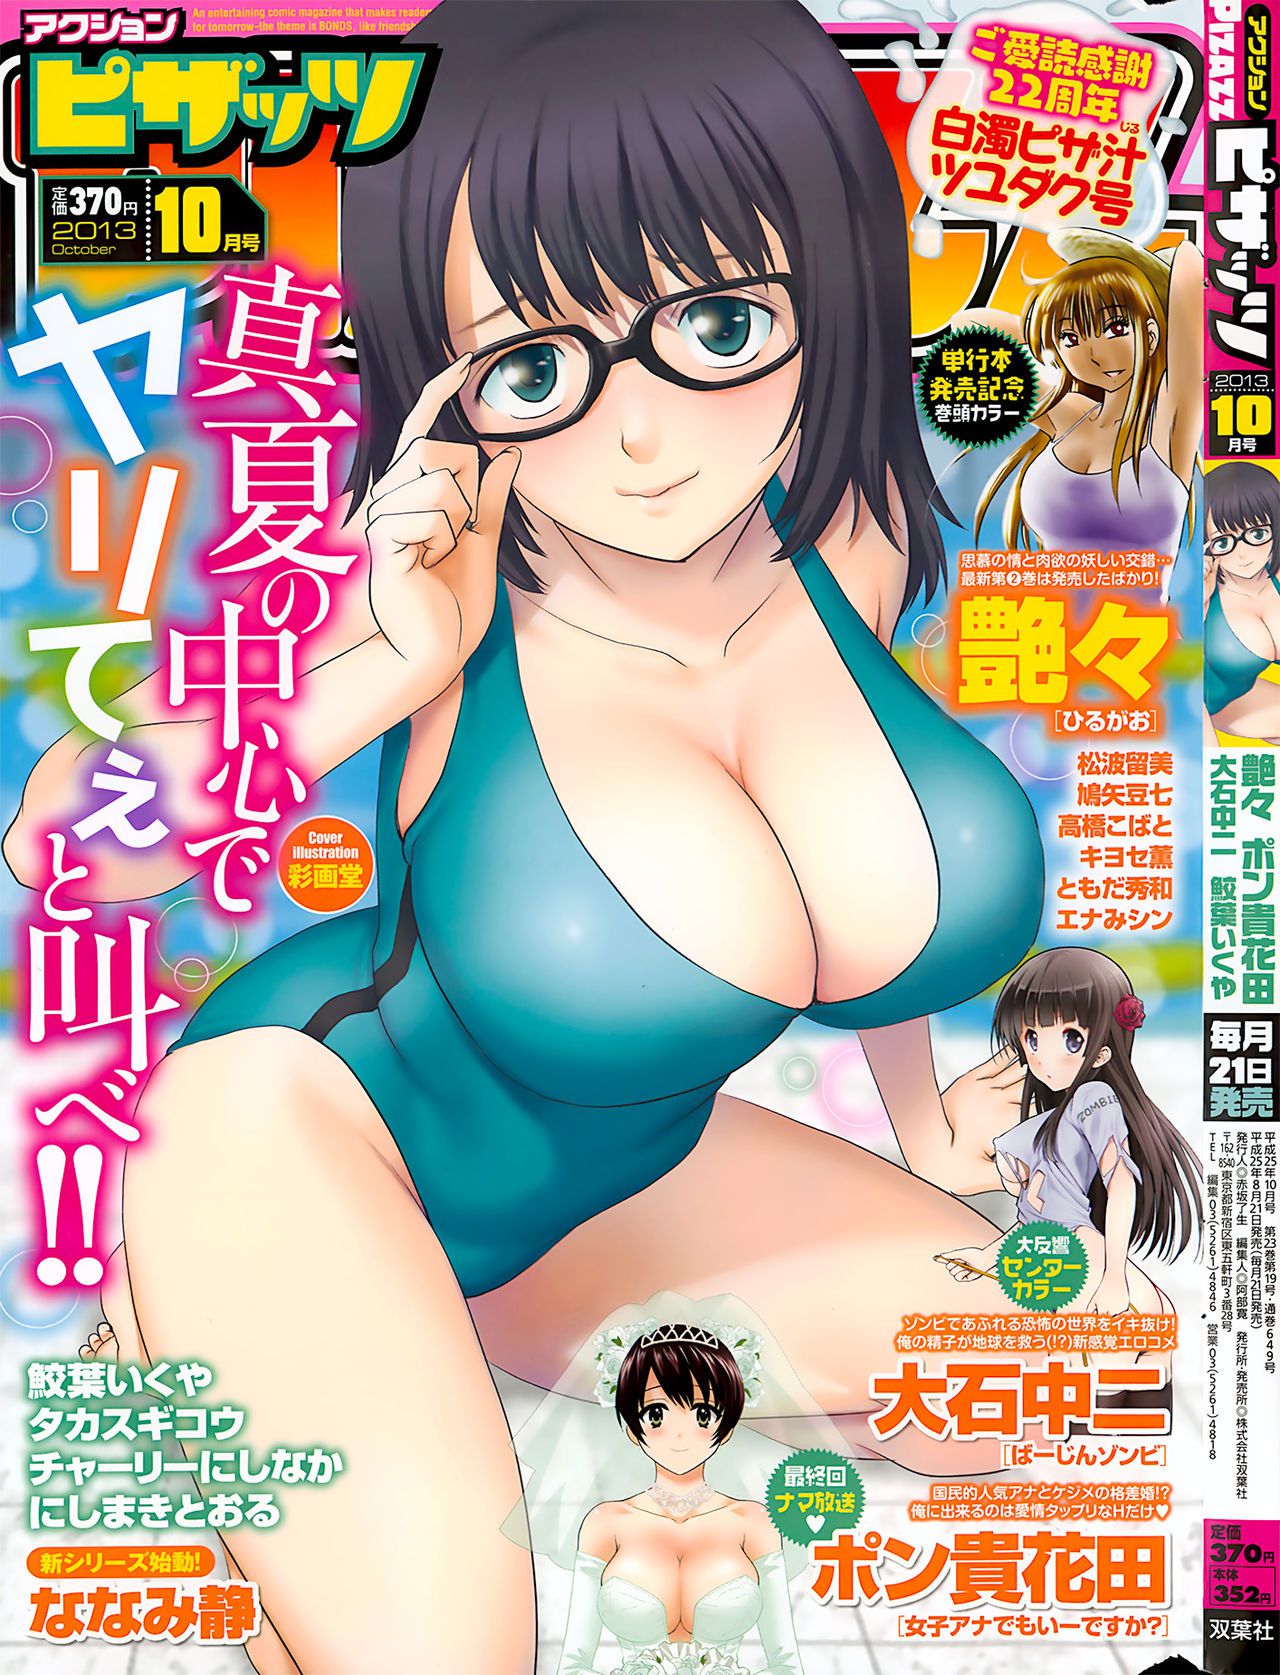 [Saigado] Cover Illustrations [彩画堂] Cover Illustrations 57